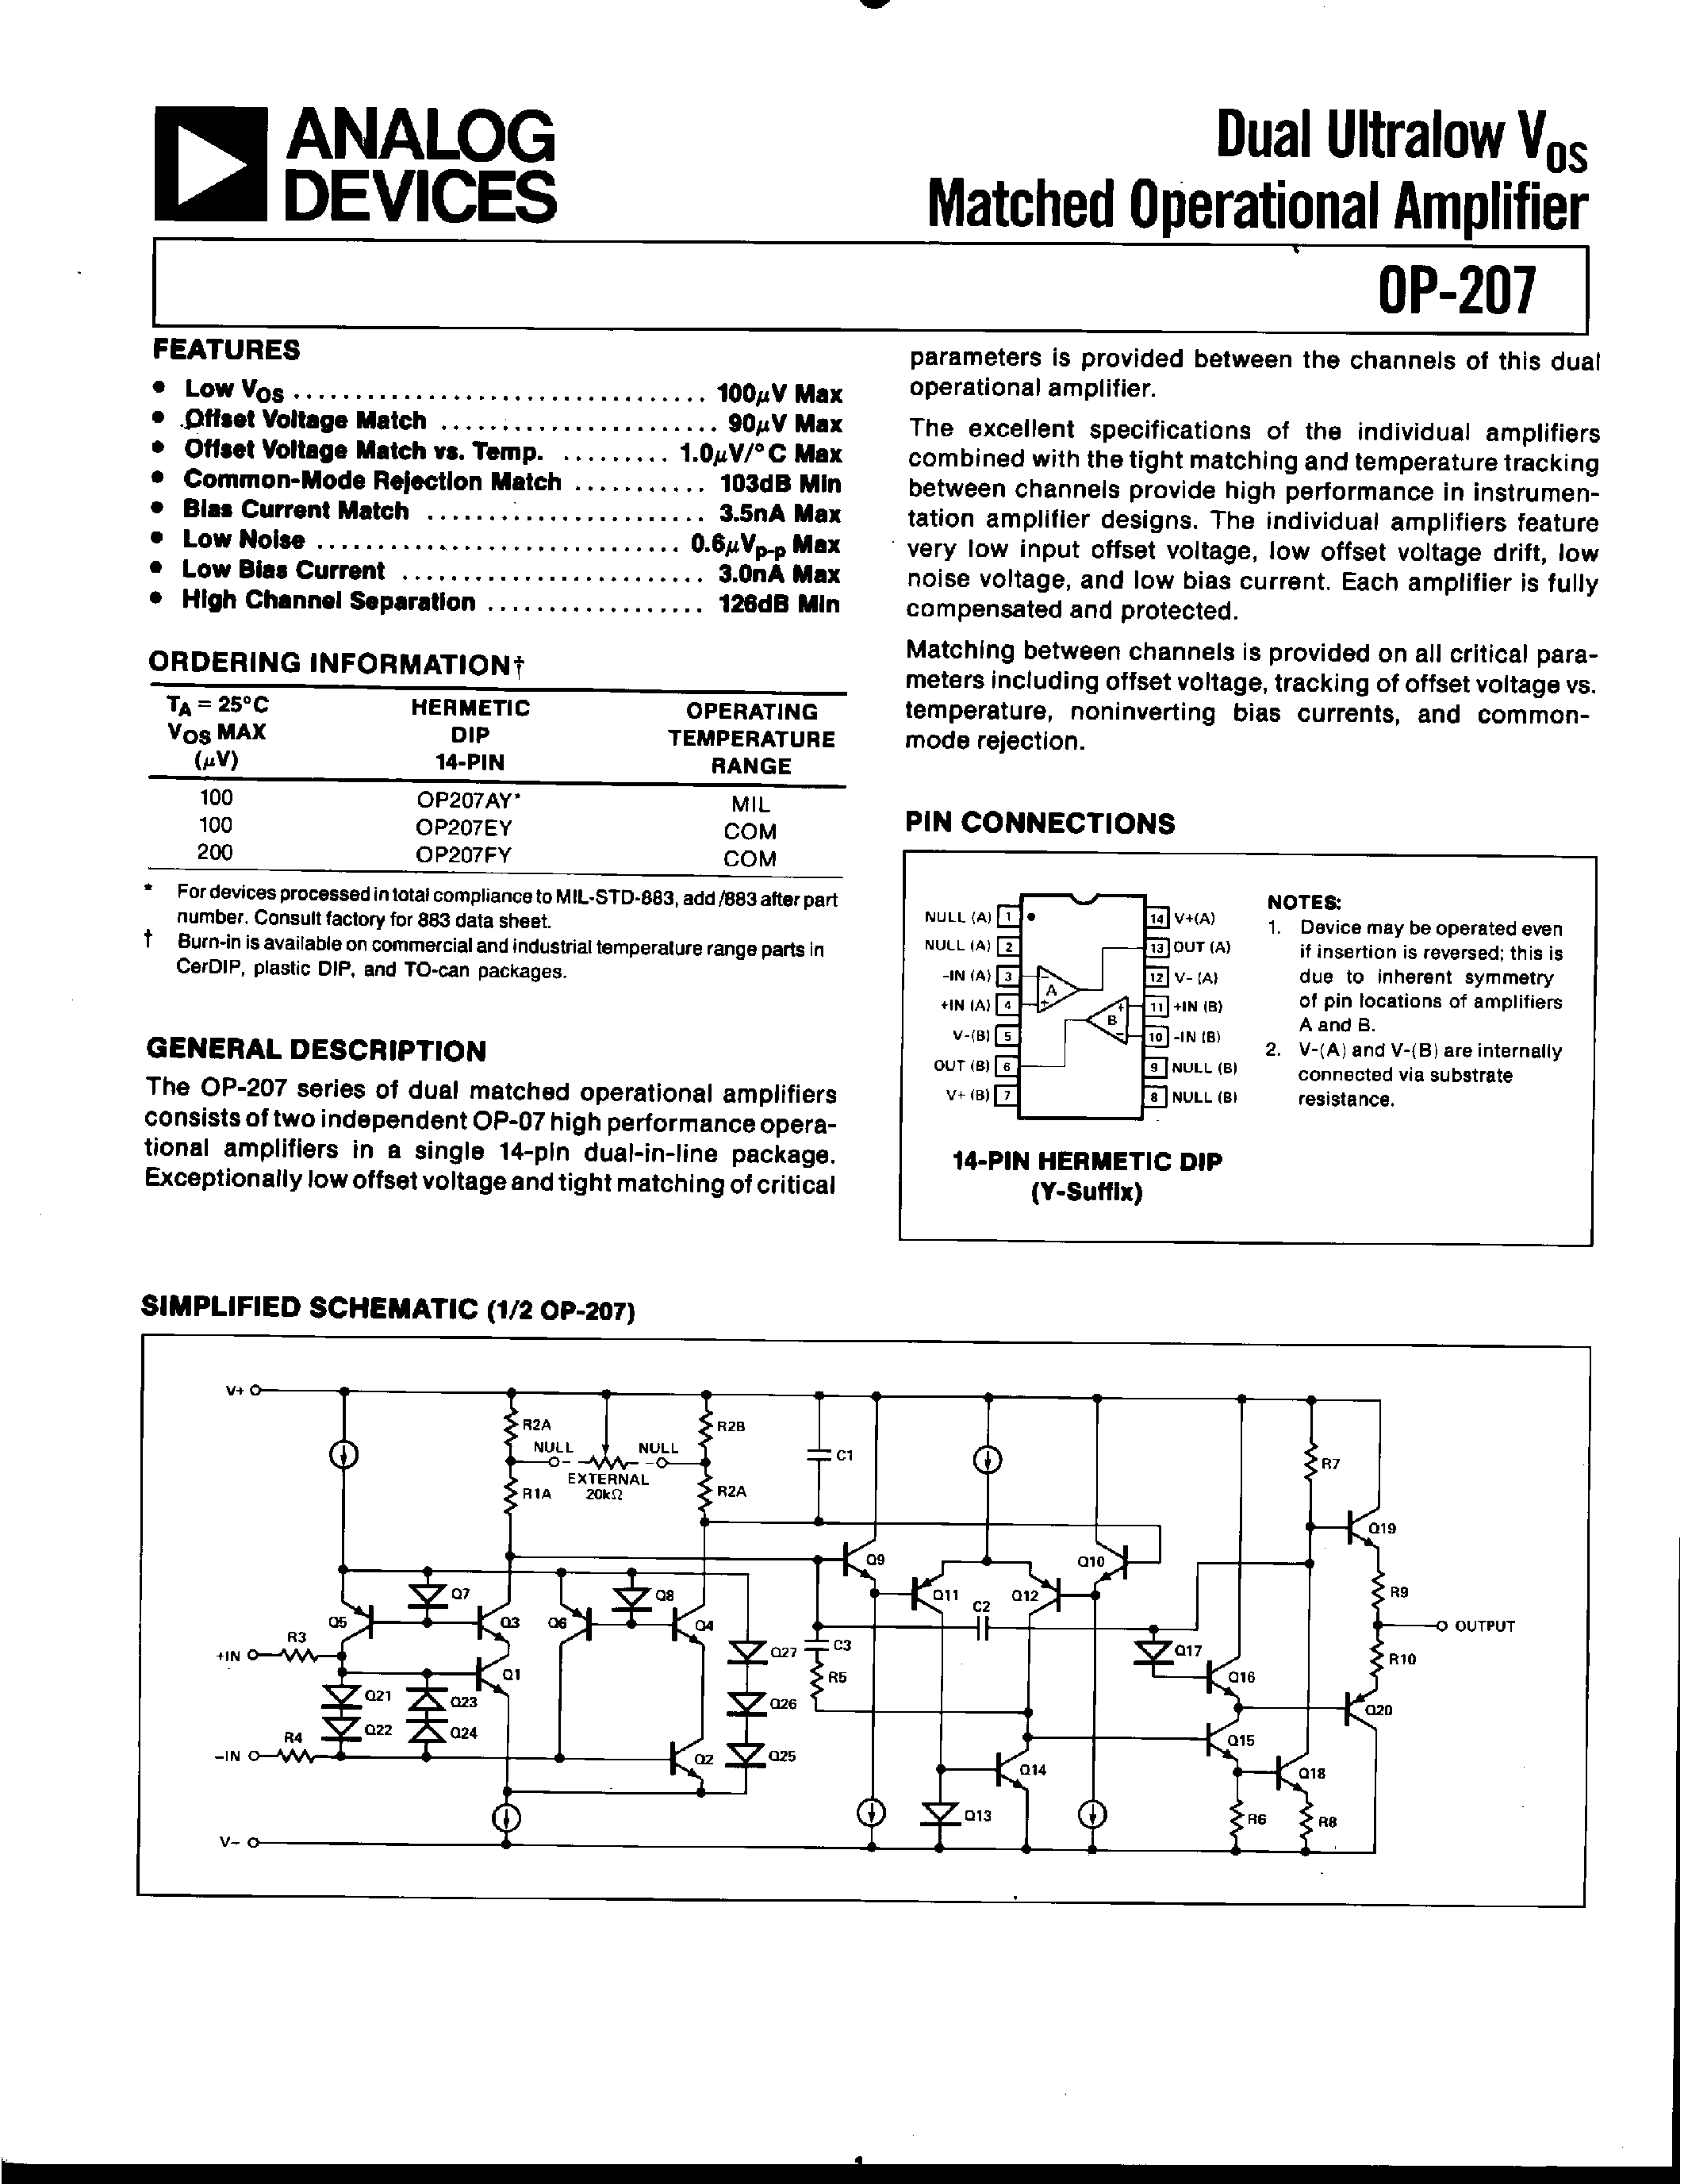 Datasheet OP207 - DUAL ULTRALOW VOS MATCHED OPERATIONAL AMPLIFIER page 1